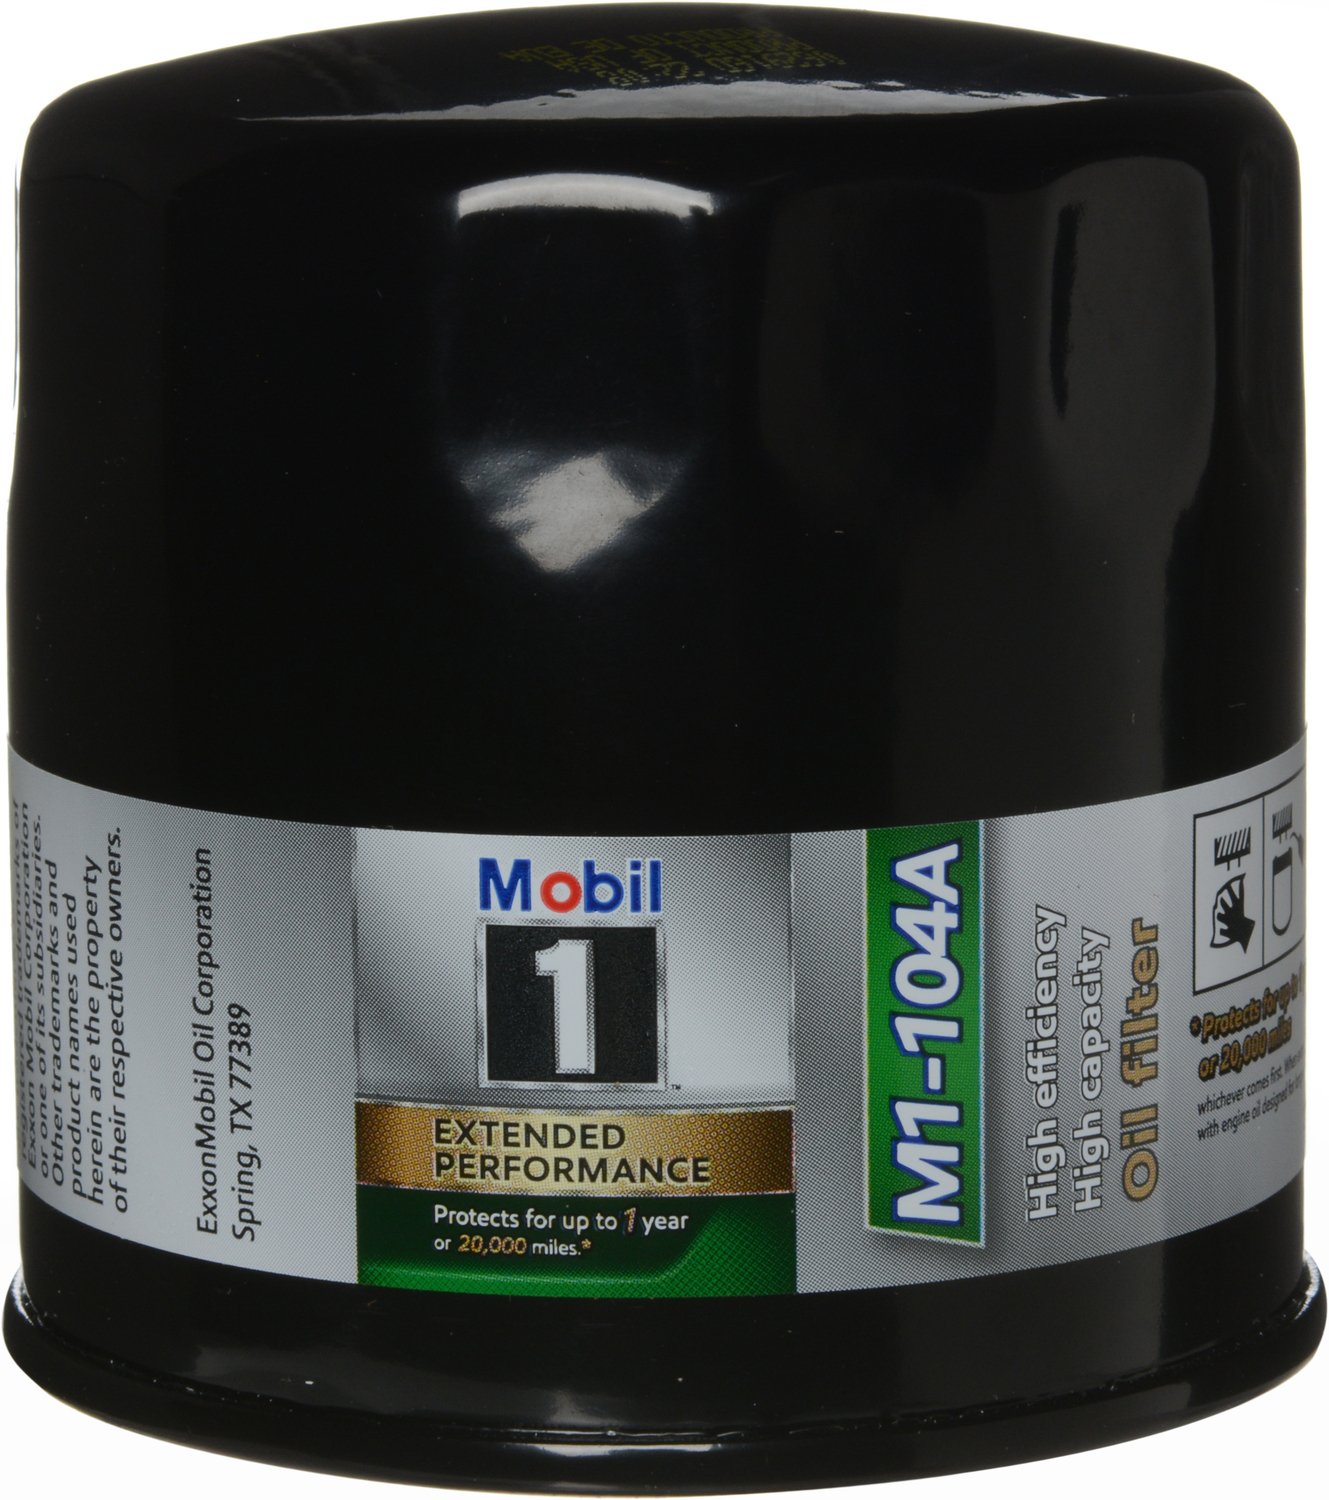 Mobil 1 M1-104A Extended Performance Oil Filter, 1 Pack  - Like New